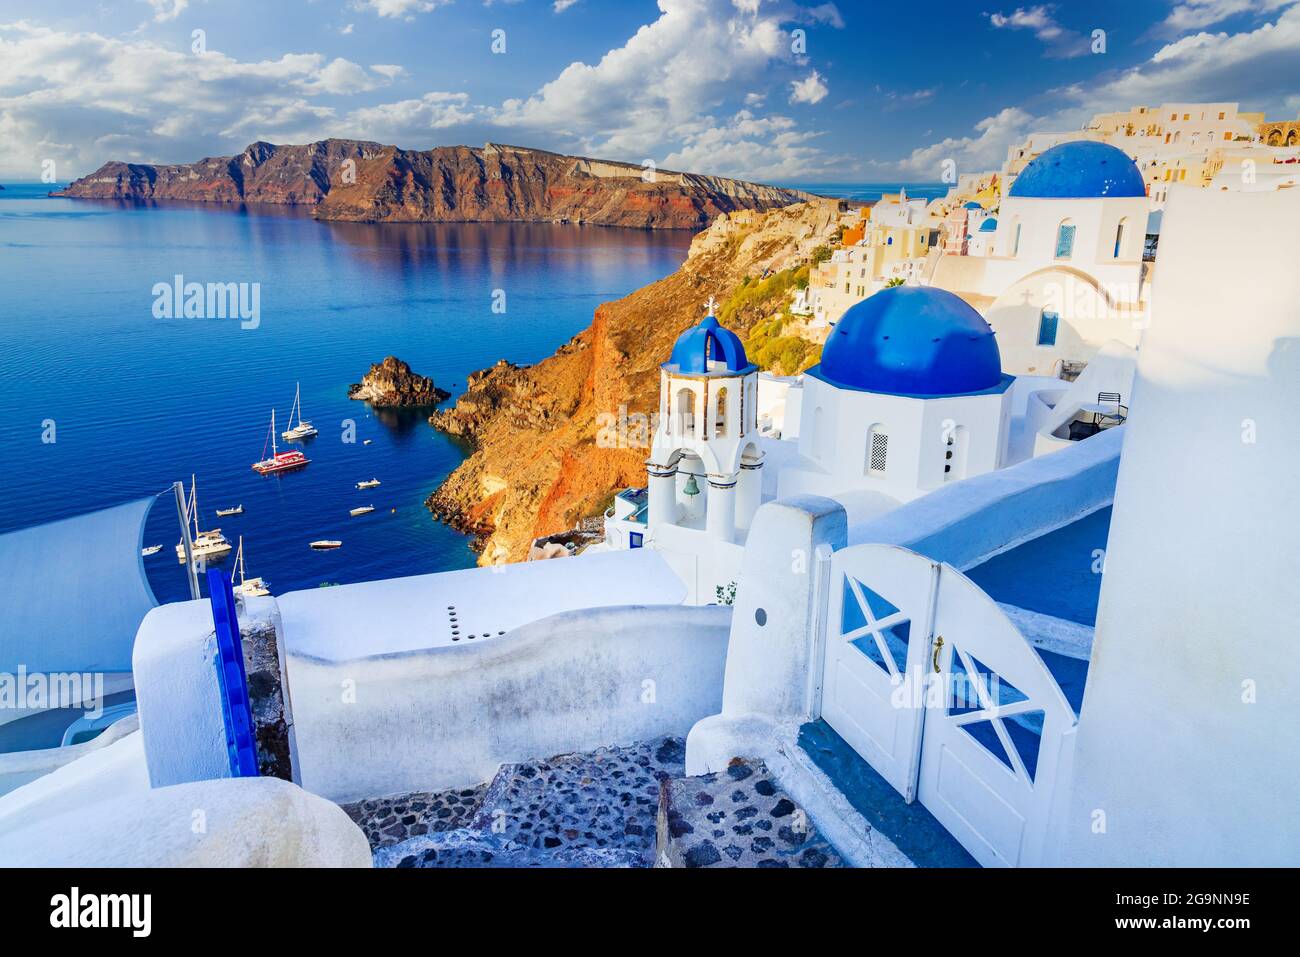 Santorini, Greece. Amazing whitewashed city of Oia, Thira in Greek Cyclades Islands, Aegean Sea. Holiday destinations of Europe. Stock Photo